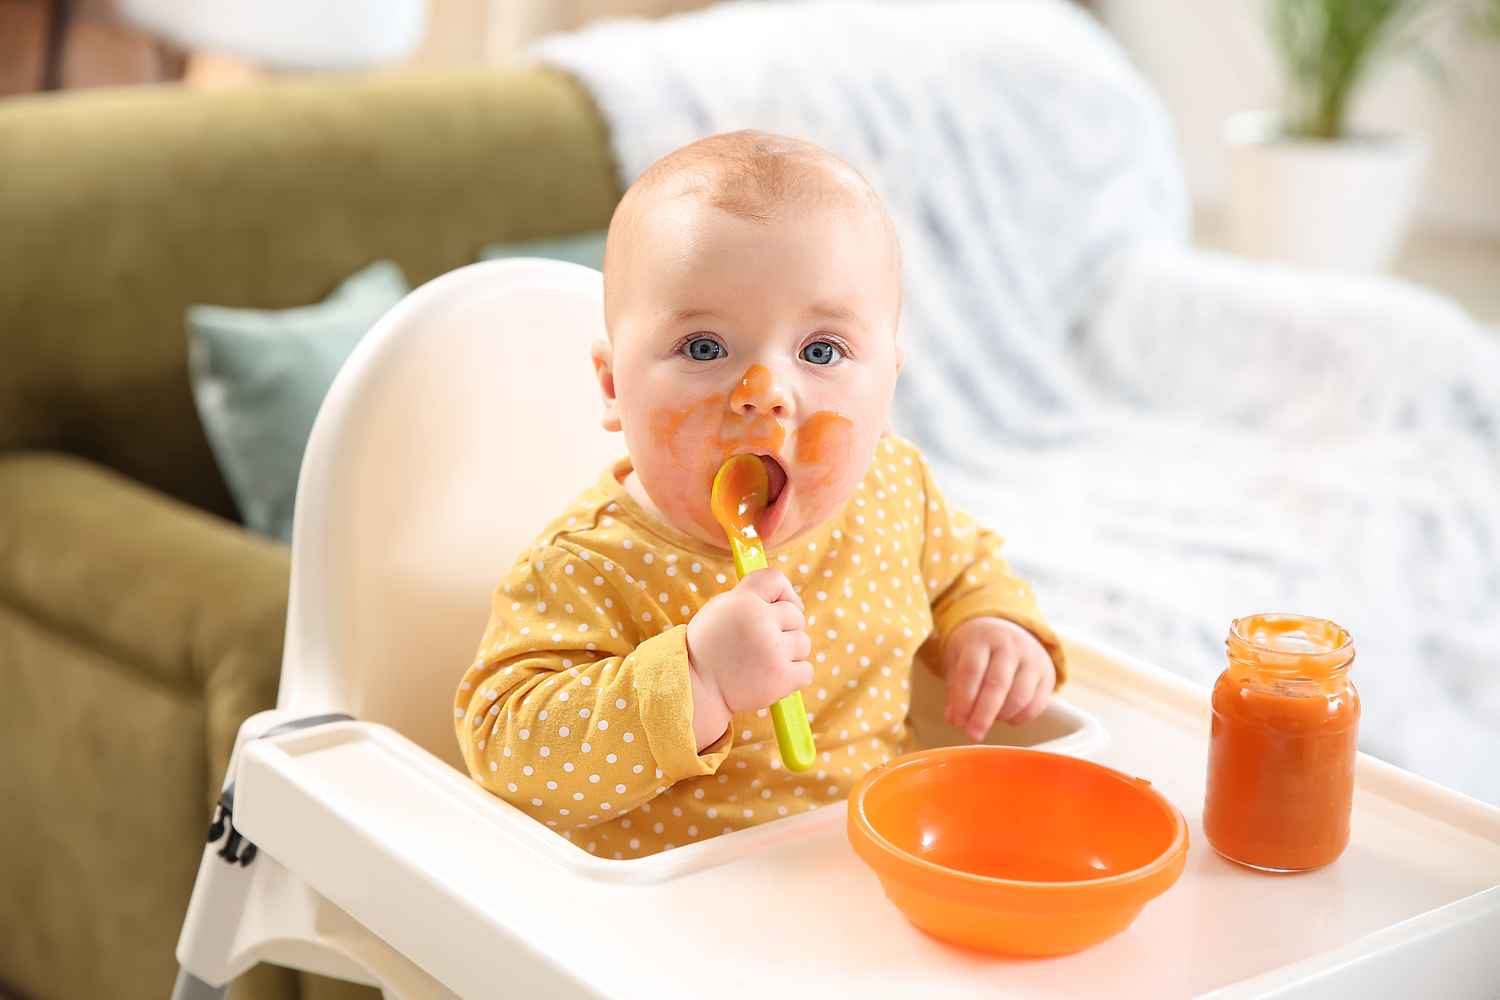 Introducing Butternut Squash to Babies